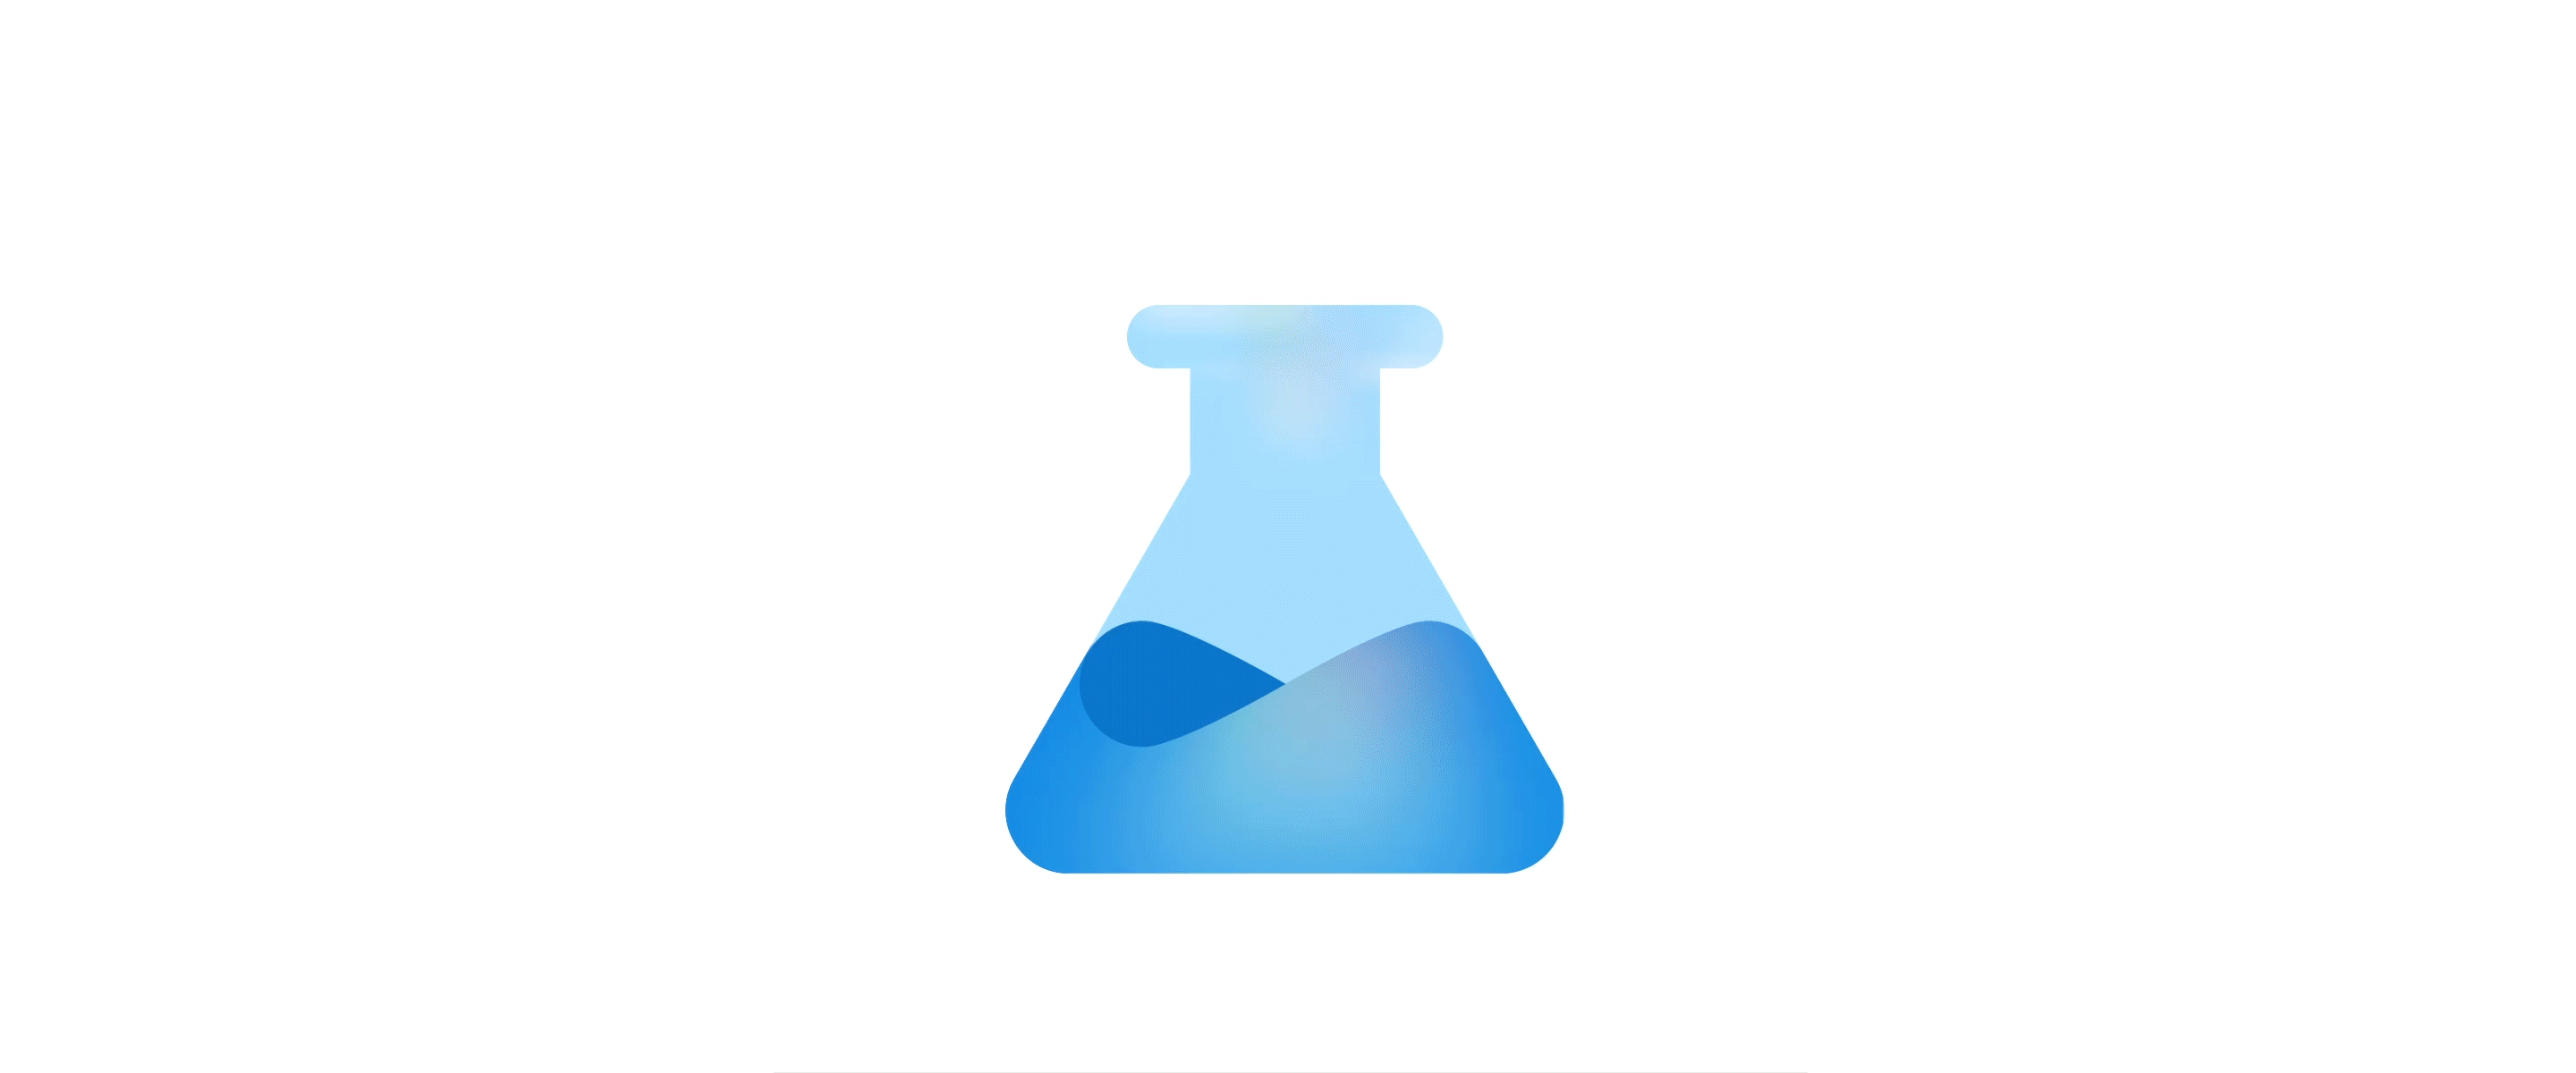 A gif of a blue beaker shaking up a multi-colored liquid